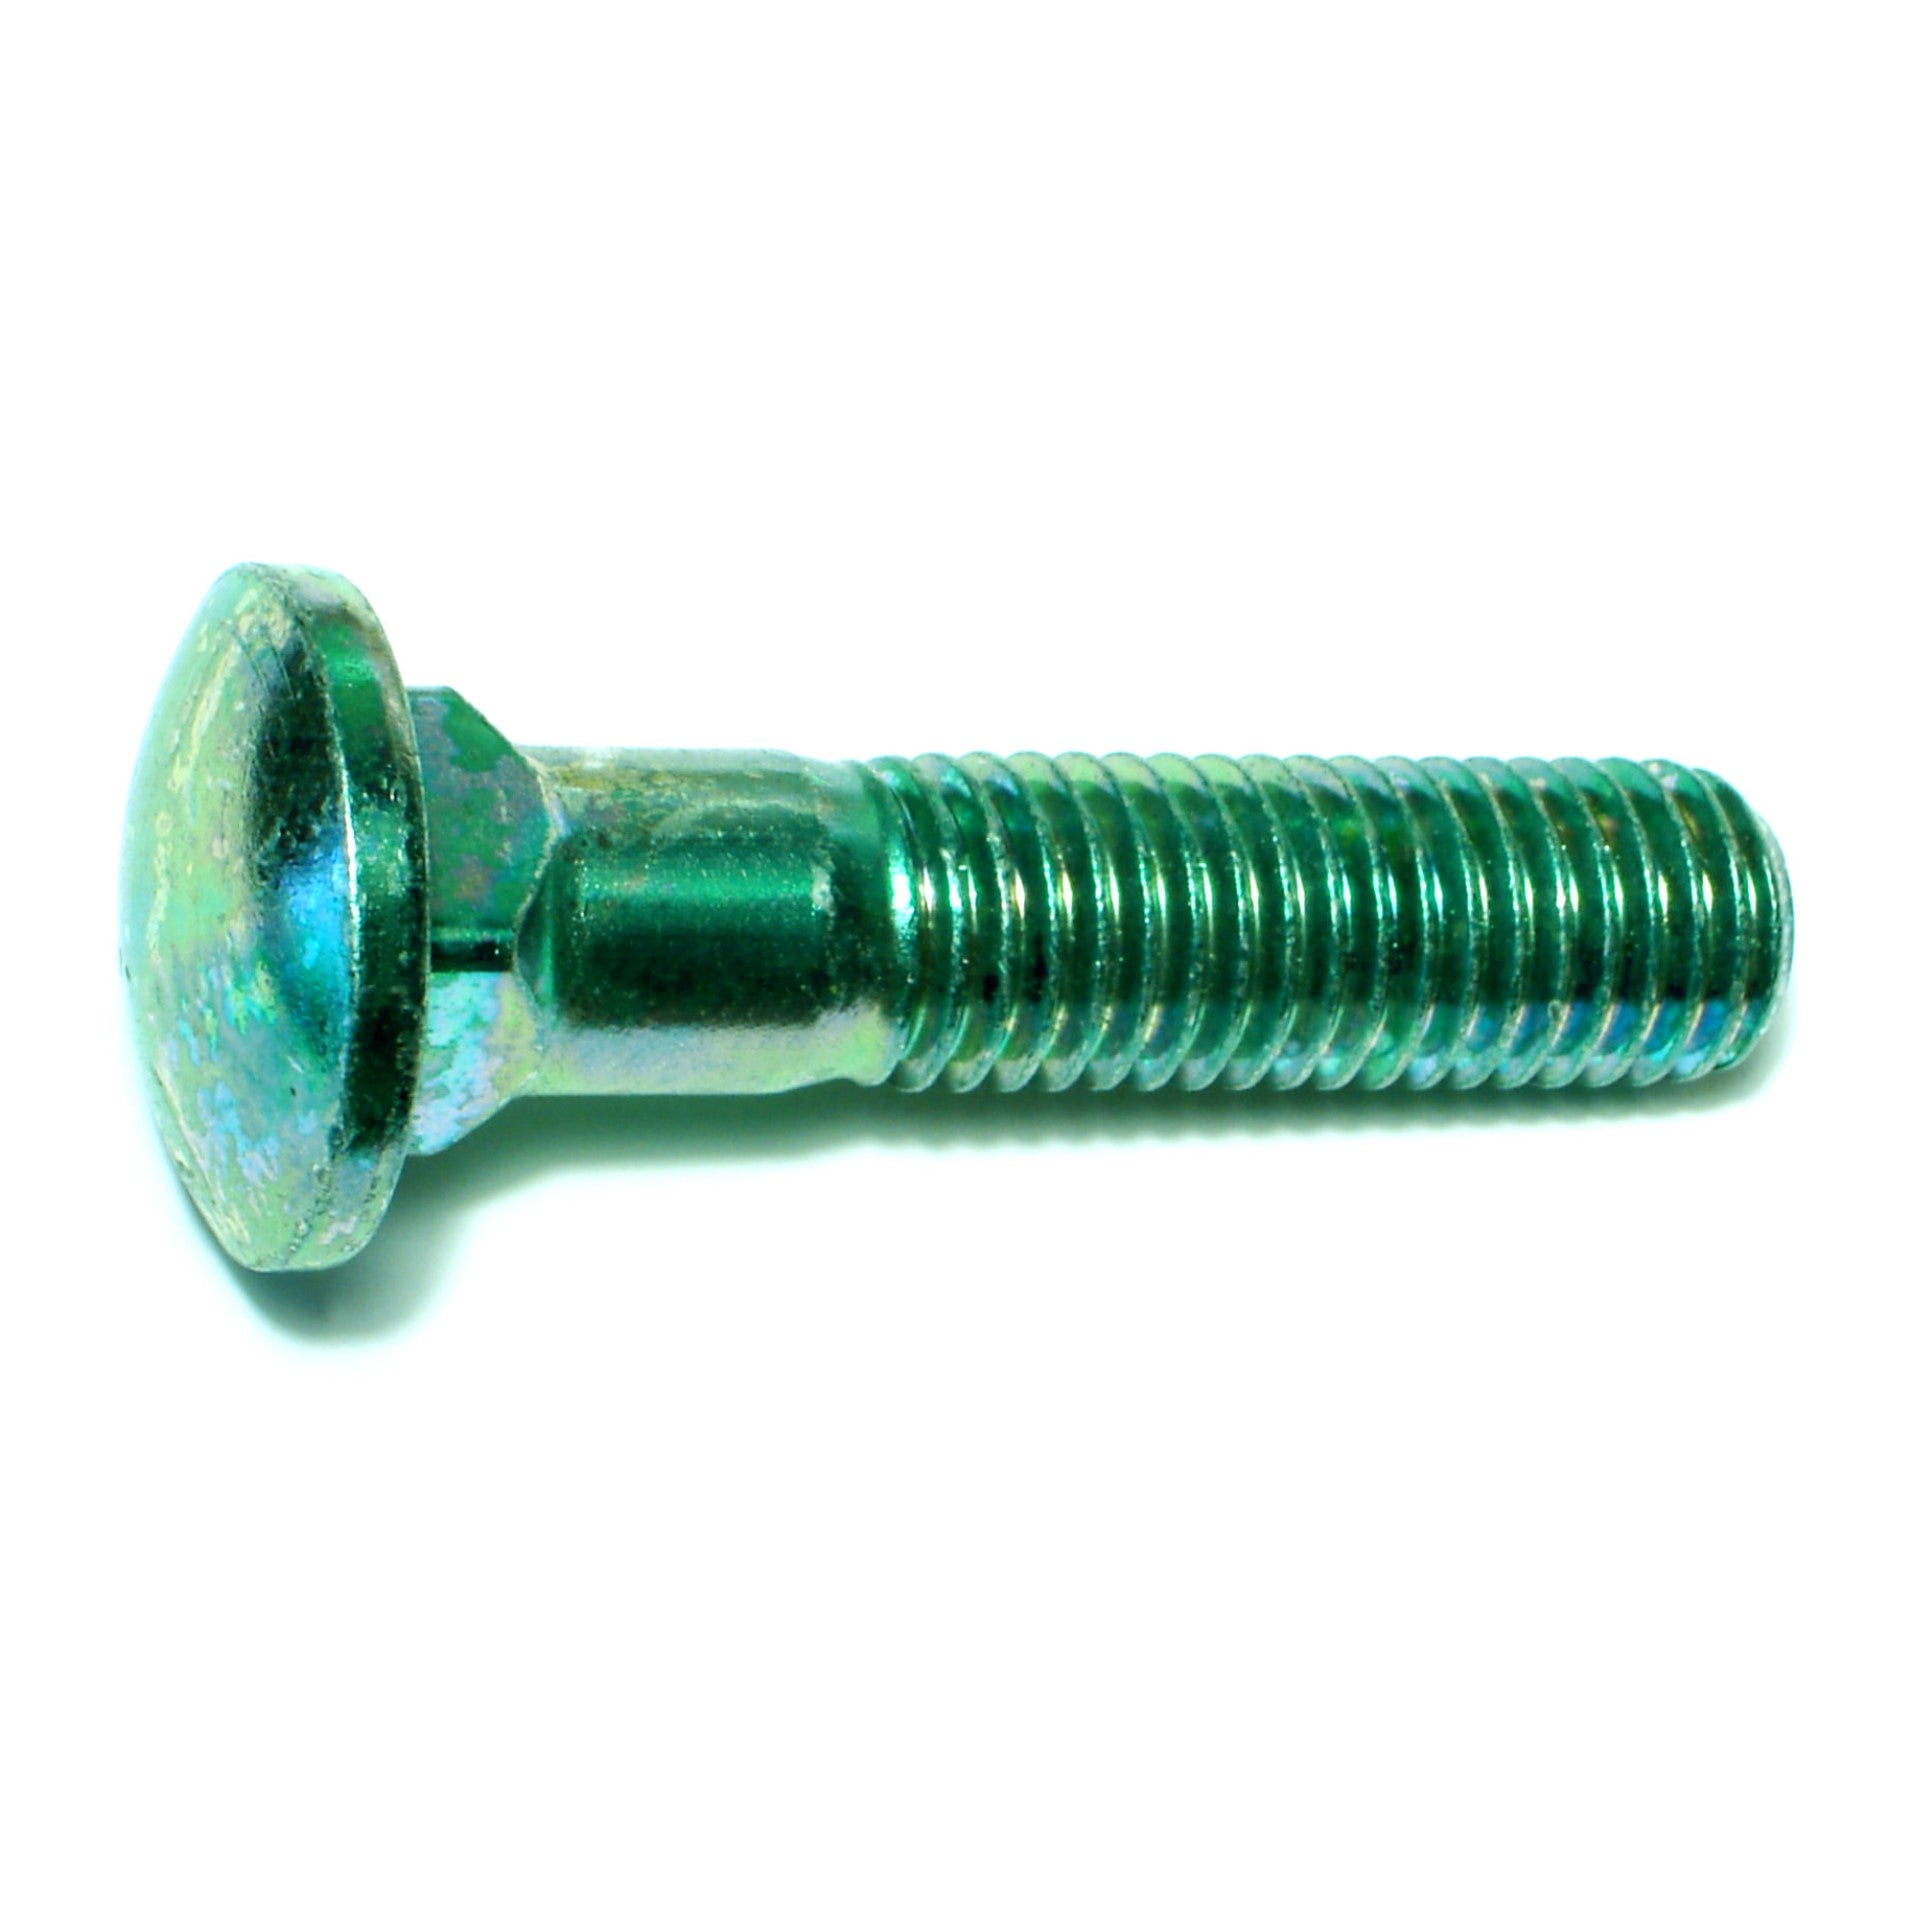 5/8"-11 x 2-3/4" Green Rinsed Zinc Plated Grade 5 Steel Coarse Thread Carriage Bolts